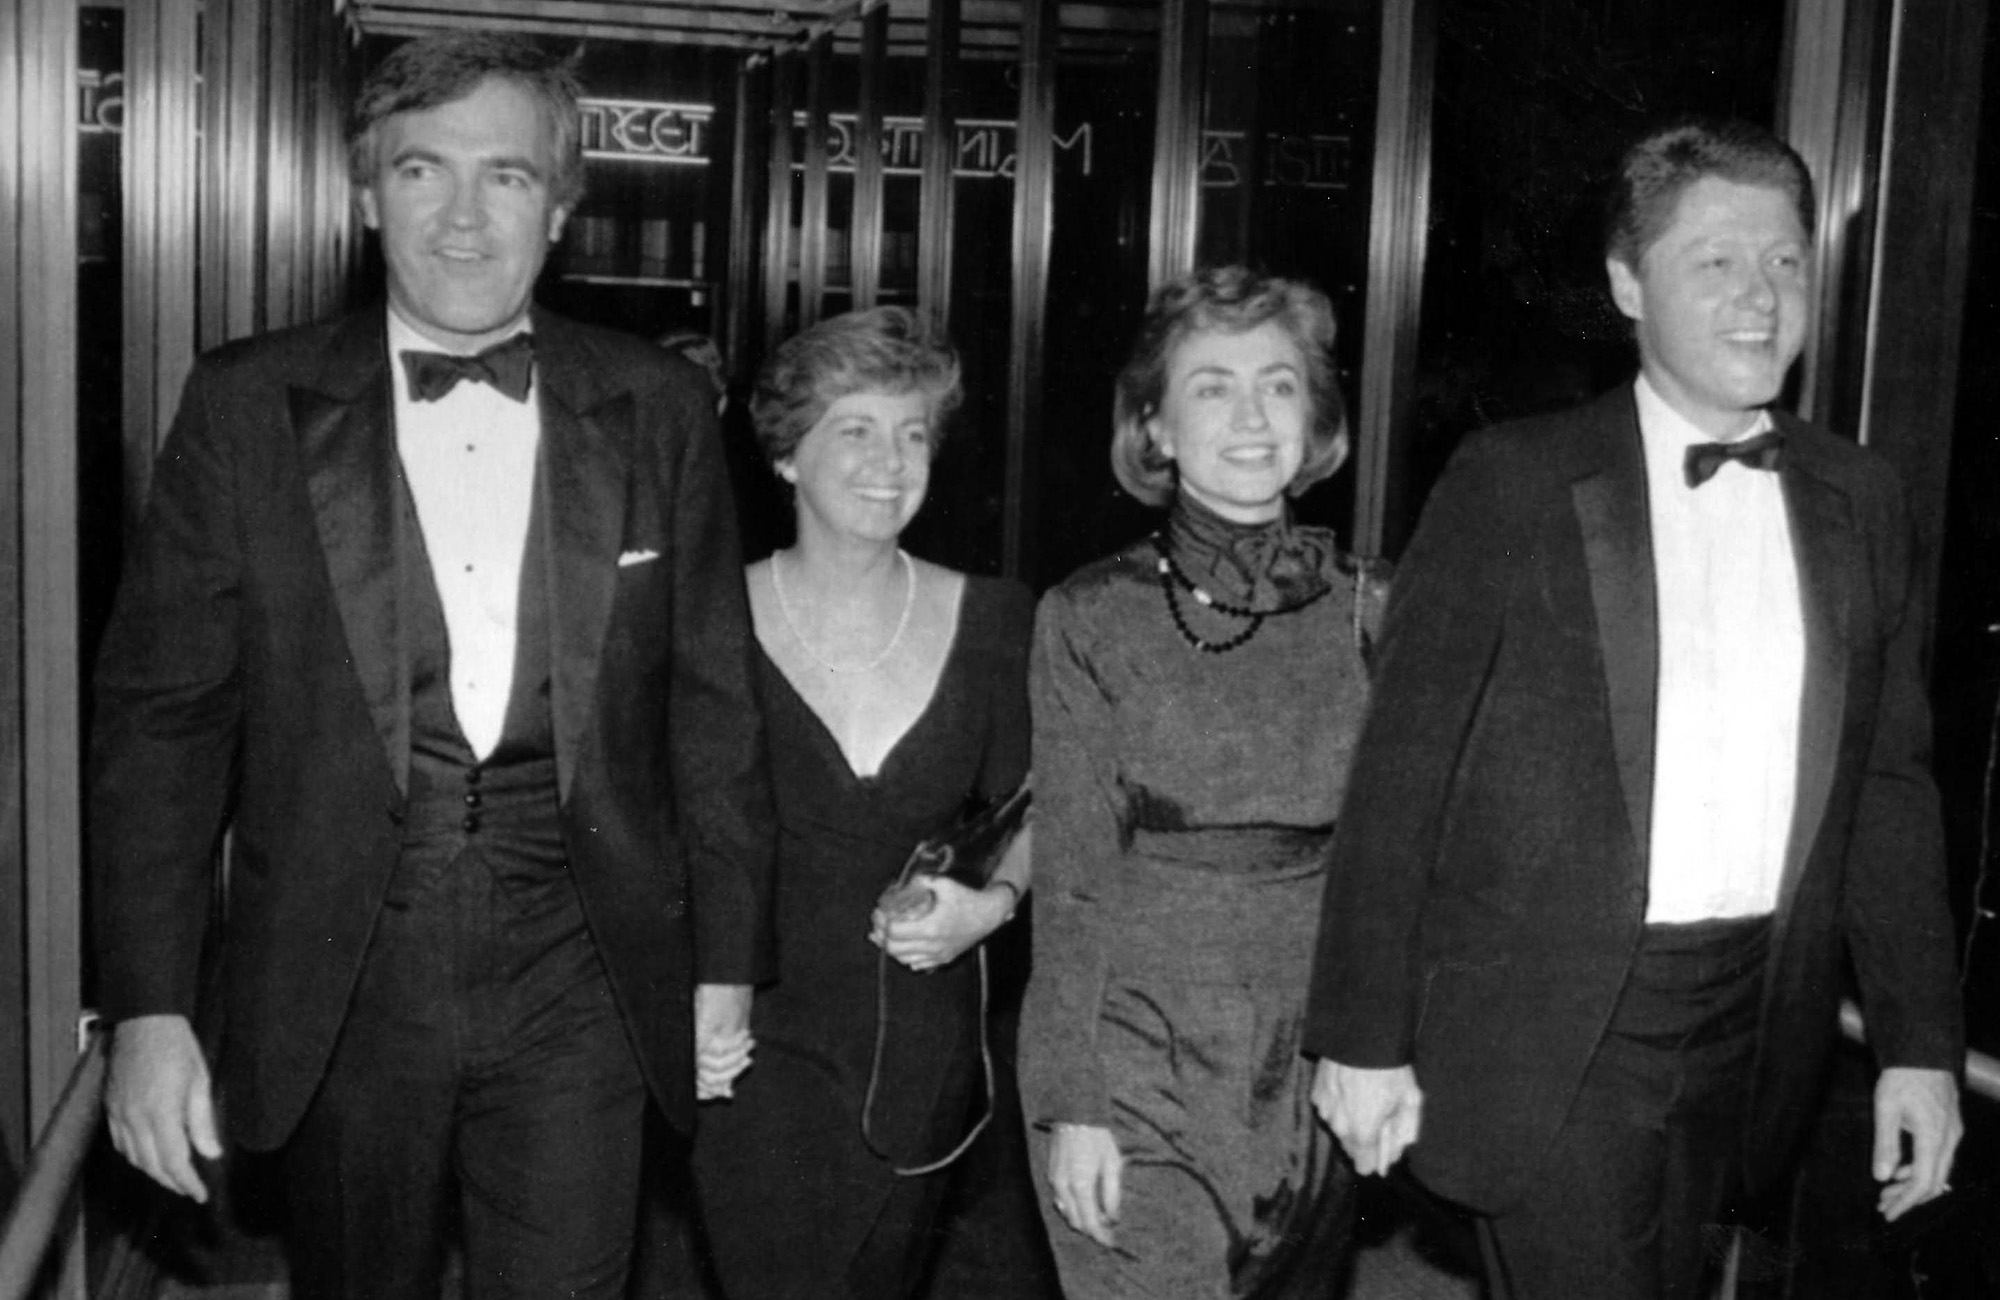 Vince Foster, left, with his wife and&nbsp;Hillary and Bill Clinton&nbsp;in this Oct. 12, 1988 photo.&nbsp;